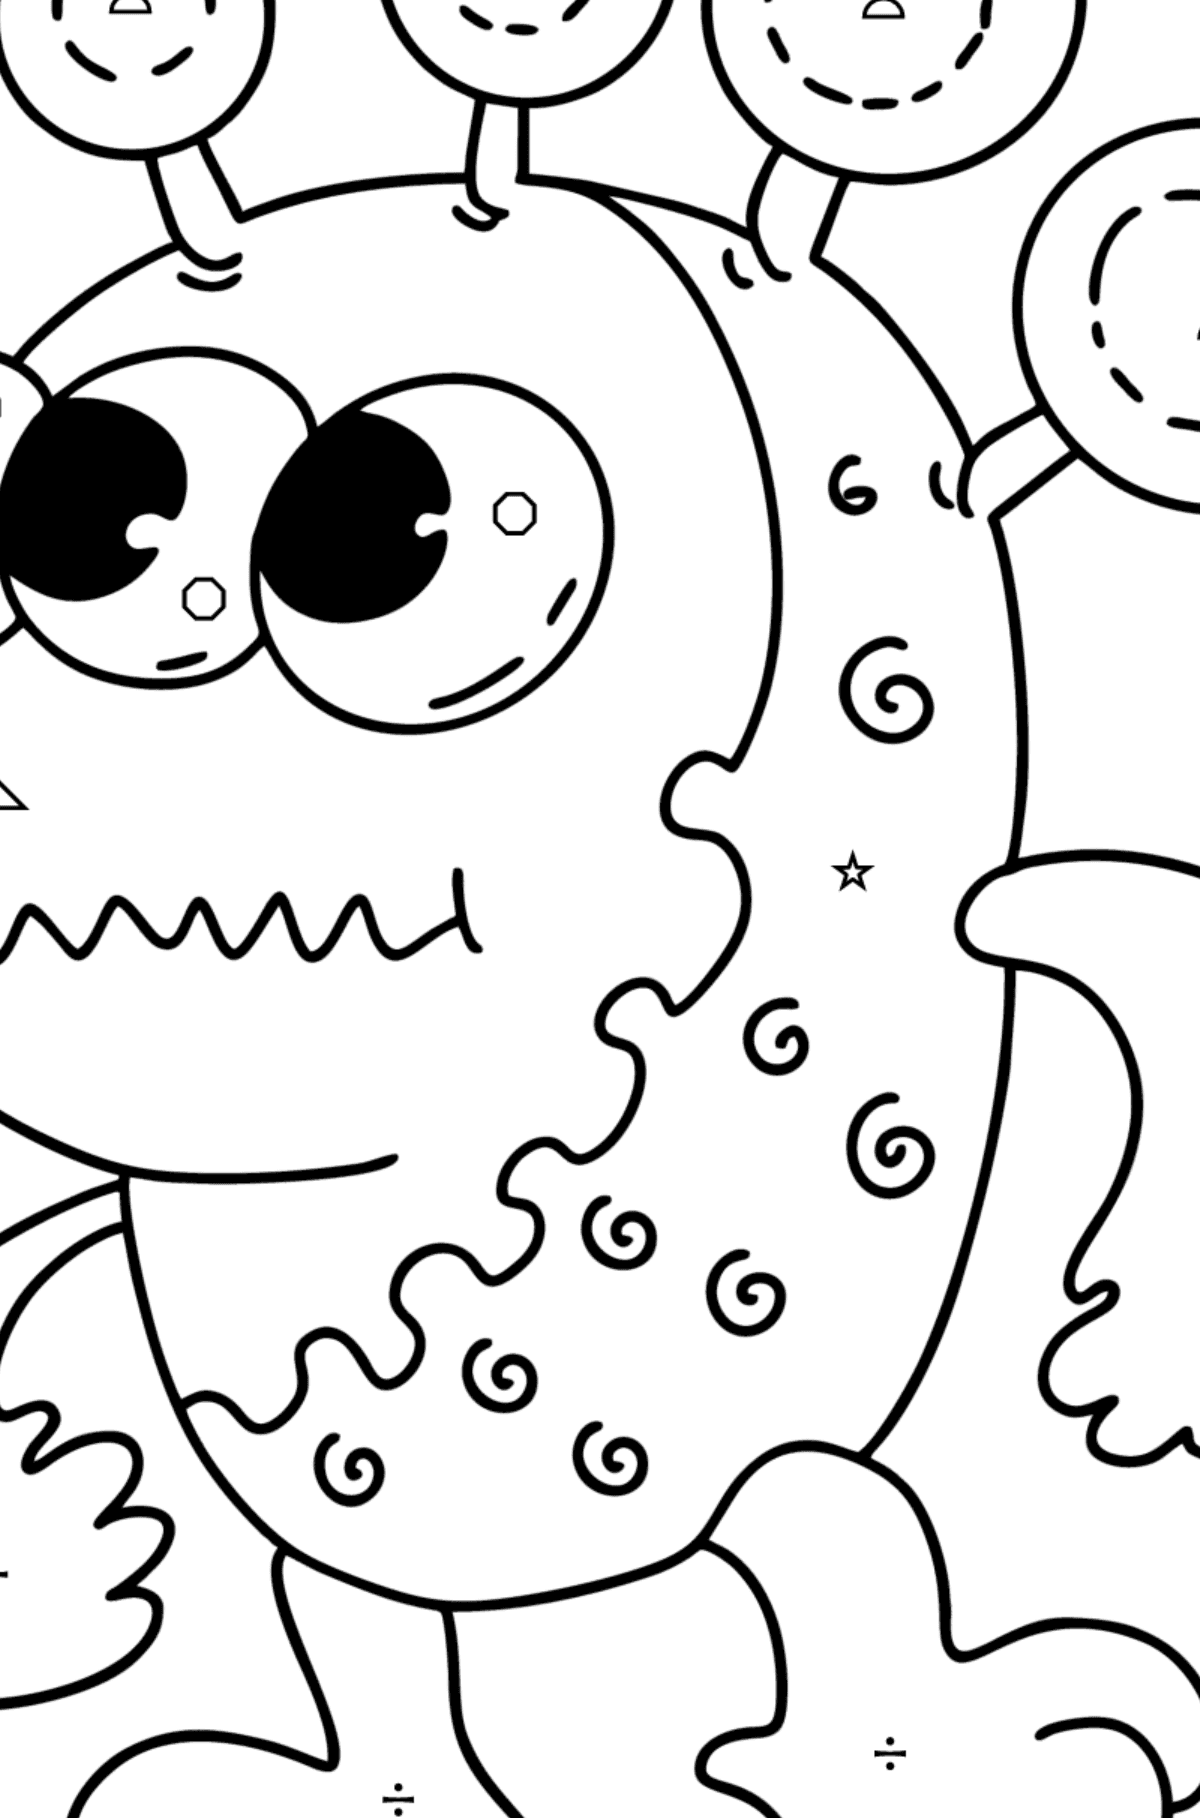 Funny Alien Coloring page - Coloring by Symbols and Geometric Shapes for Kids